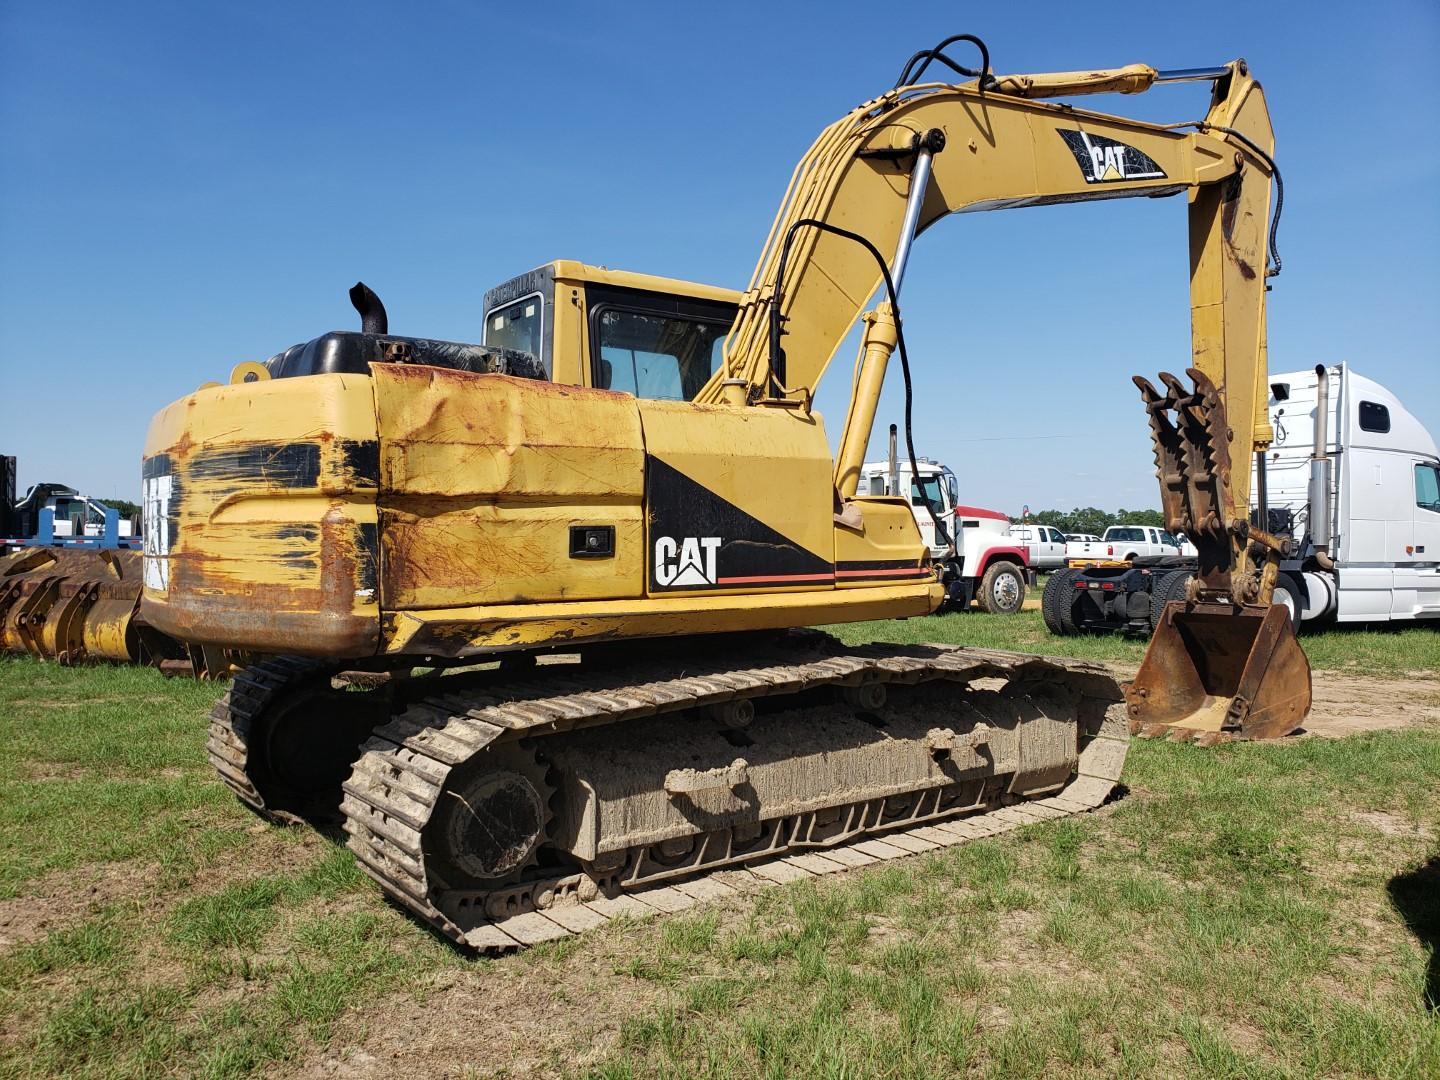 Cat 315B Excavator s/n 3AW02123: Showing 7638 hrs